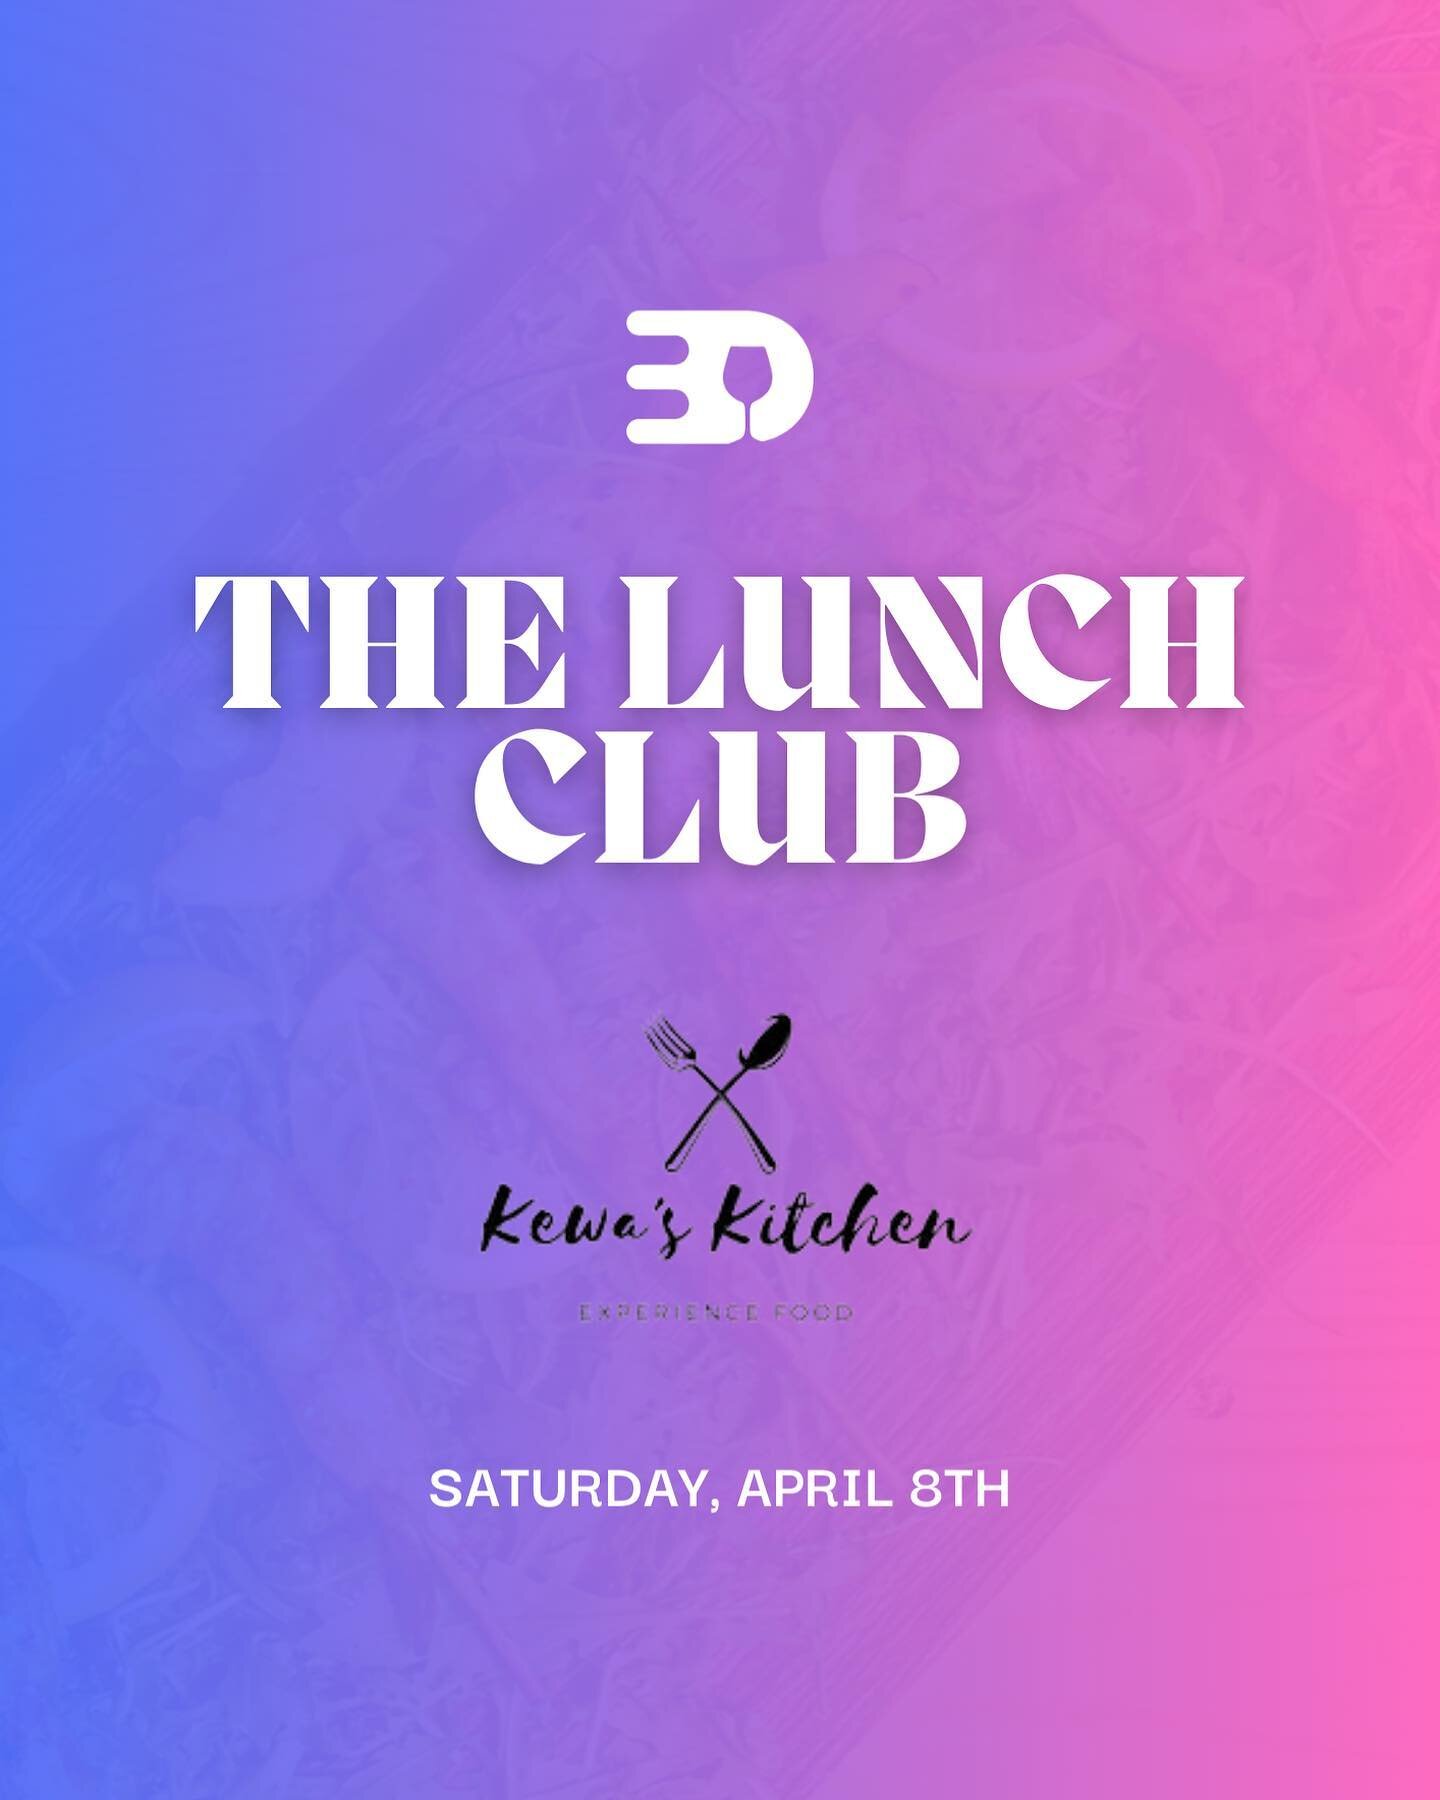 Looking forward to seeing old friends and making new ones!

#EDLLunchClub is back with a lush *all-new* menu from @kewaskitchen + bottomless drinks from KK&rsquo;s Prosecco bar 🥂

Link in our bio now to subscribe to our mailing list and be the first